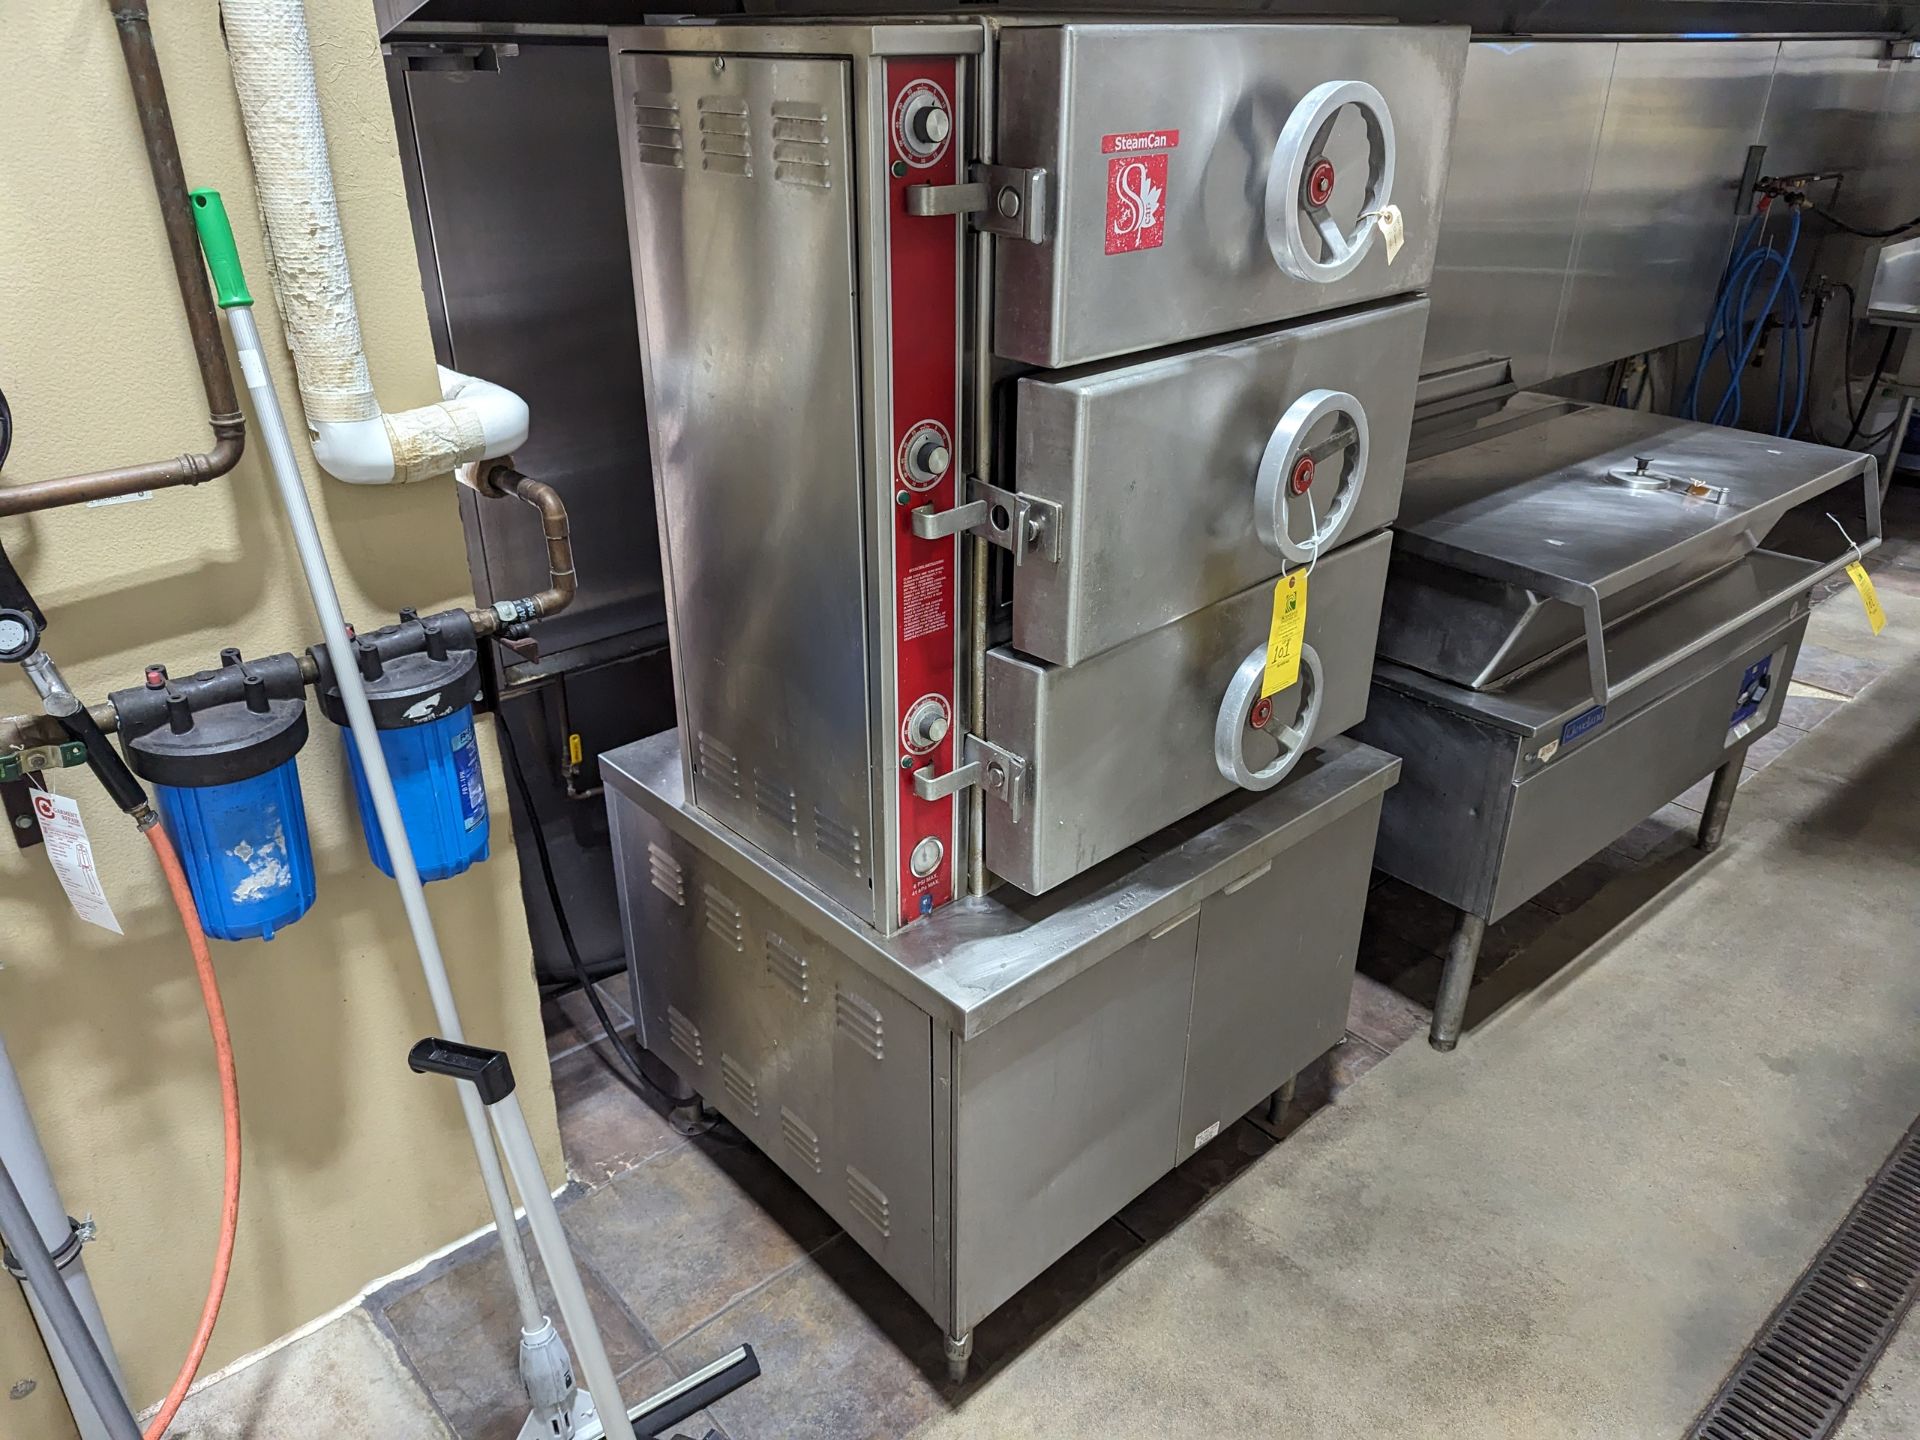 SteamCan GC-3 Pressure Steamer, Dimensions LxWxH 33x36x69, Rigging Price: $120 - Image 2 of 5